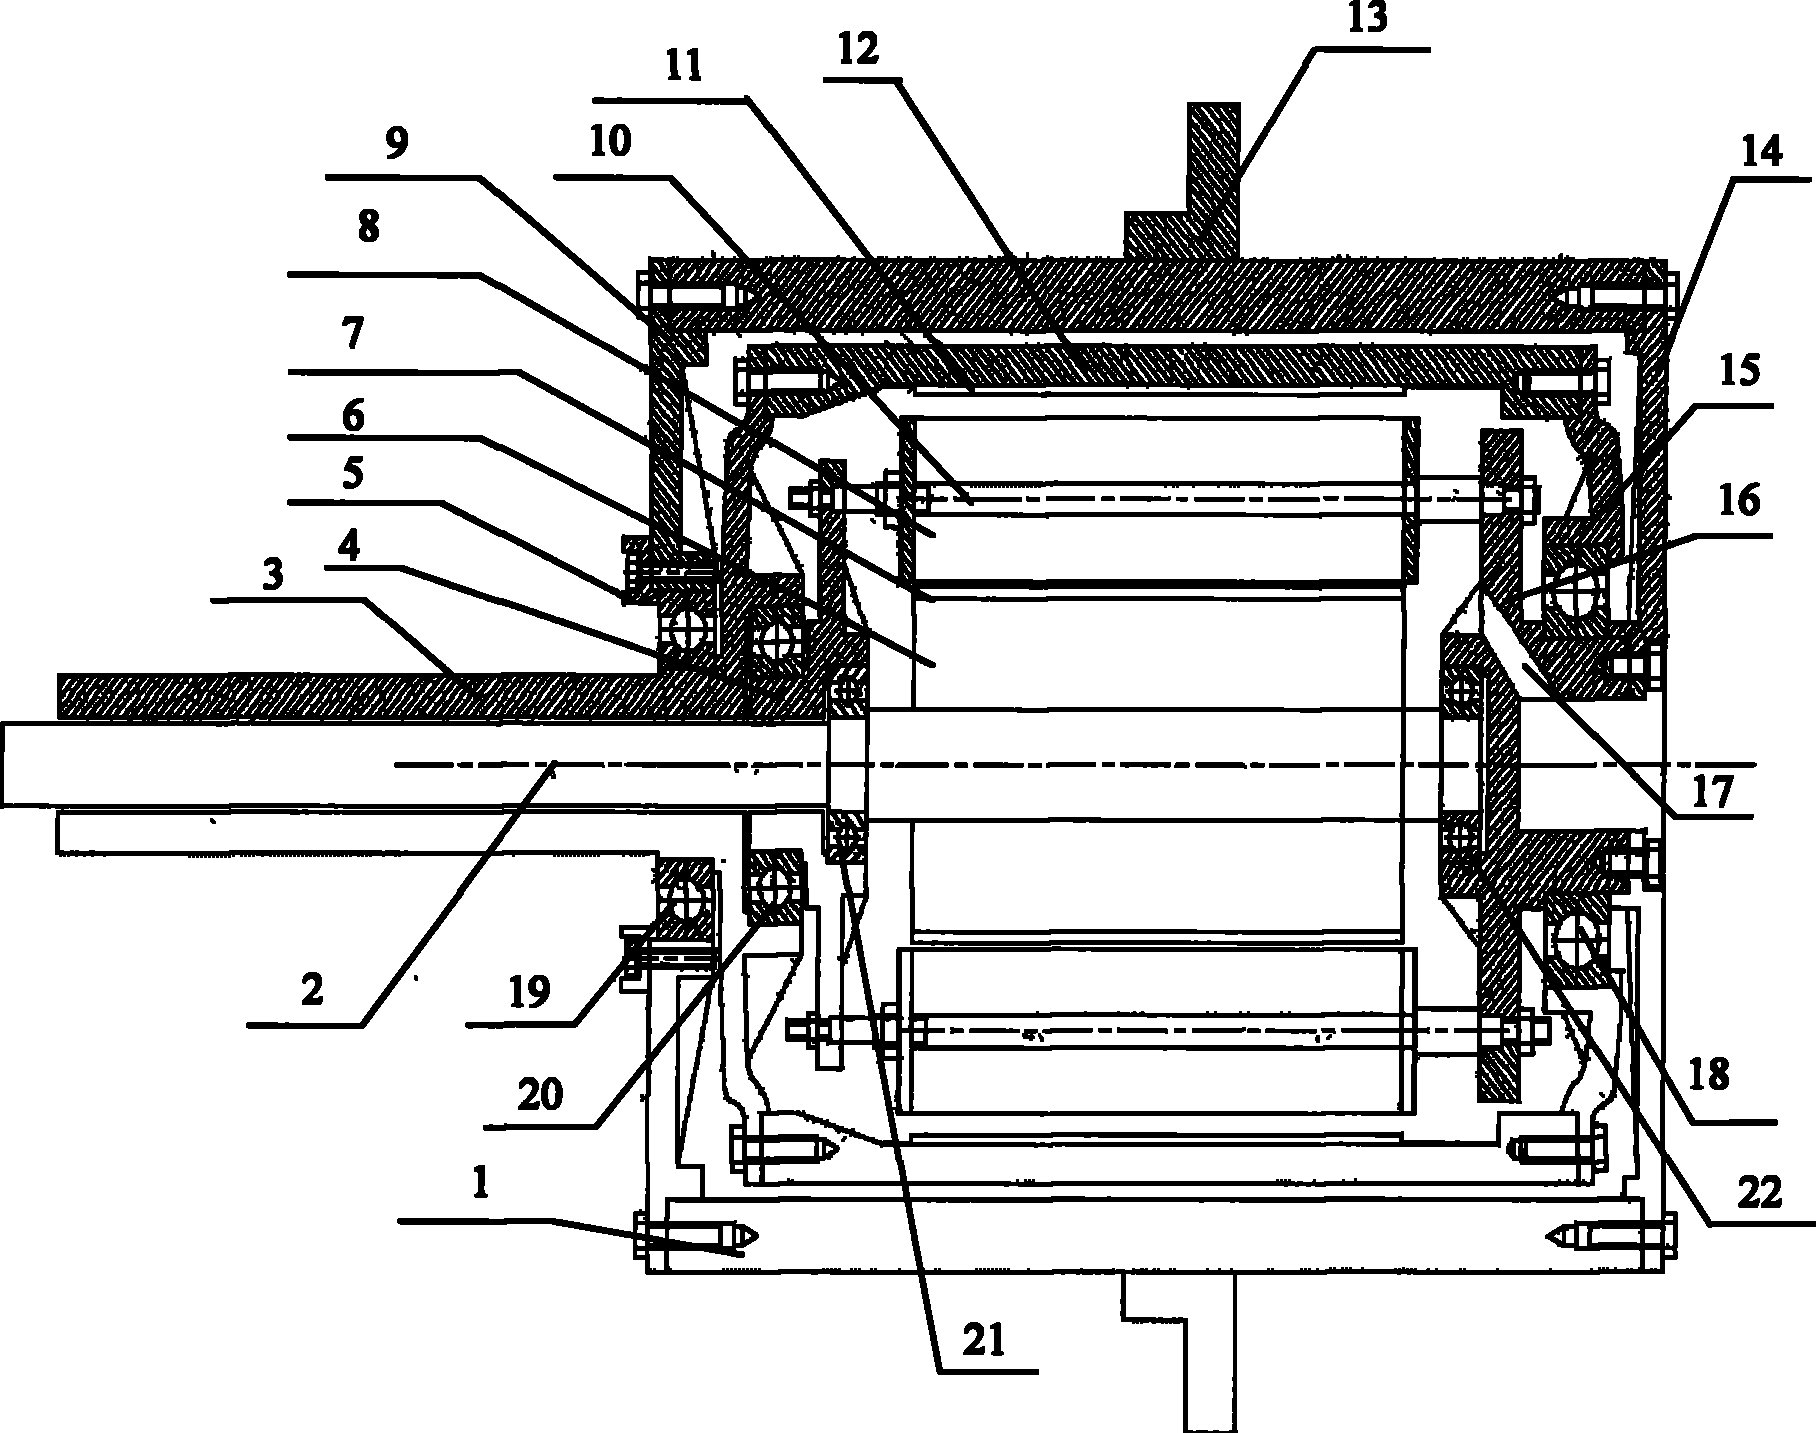 Permanent magnetic synchronous motor having single electricity port and dual mechanical port of same speed in reversed direction